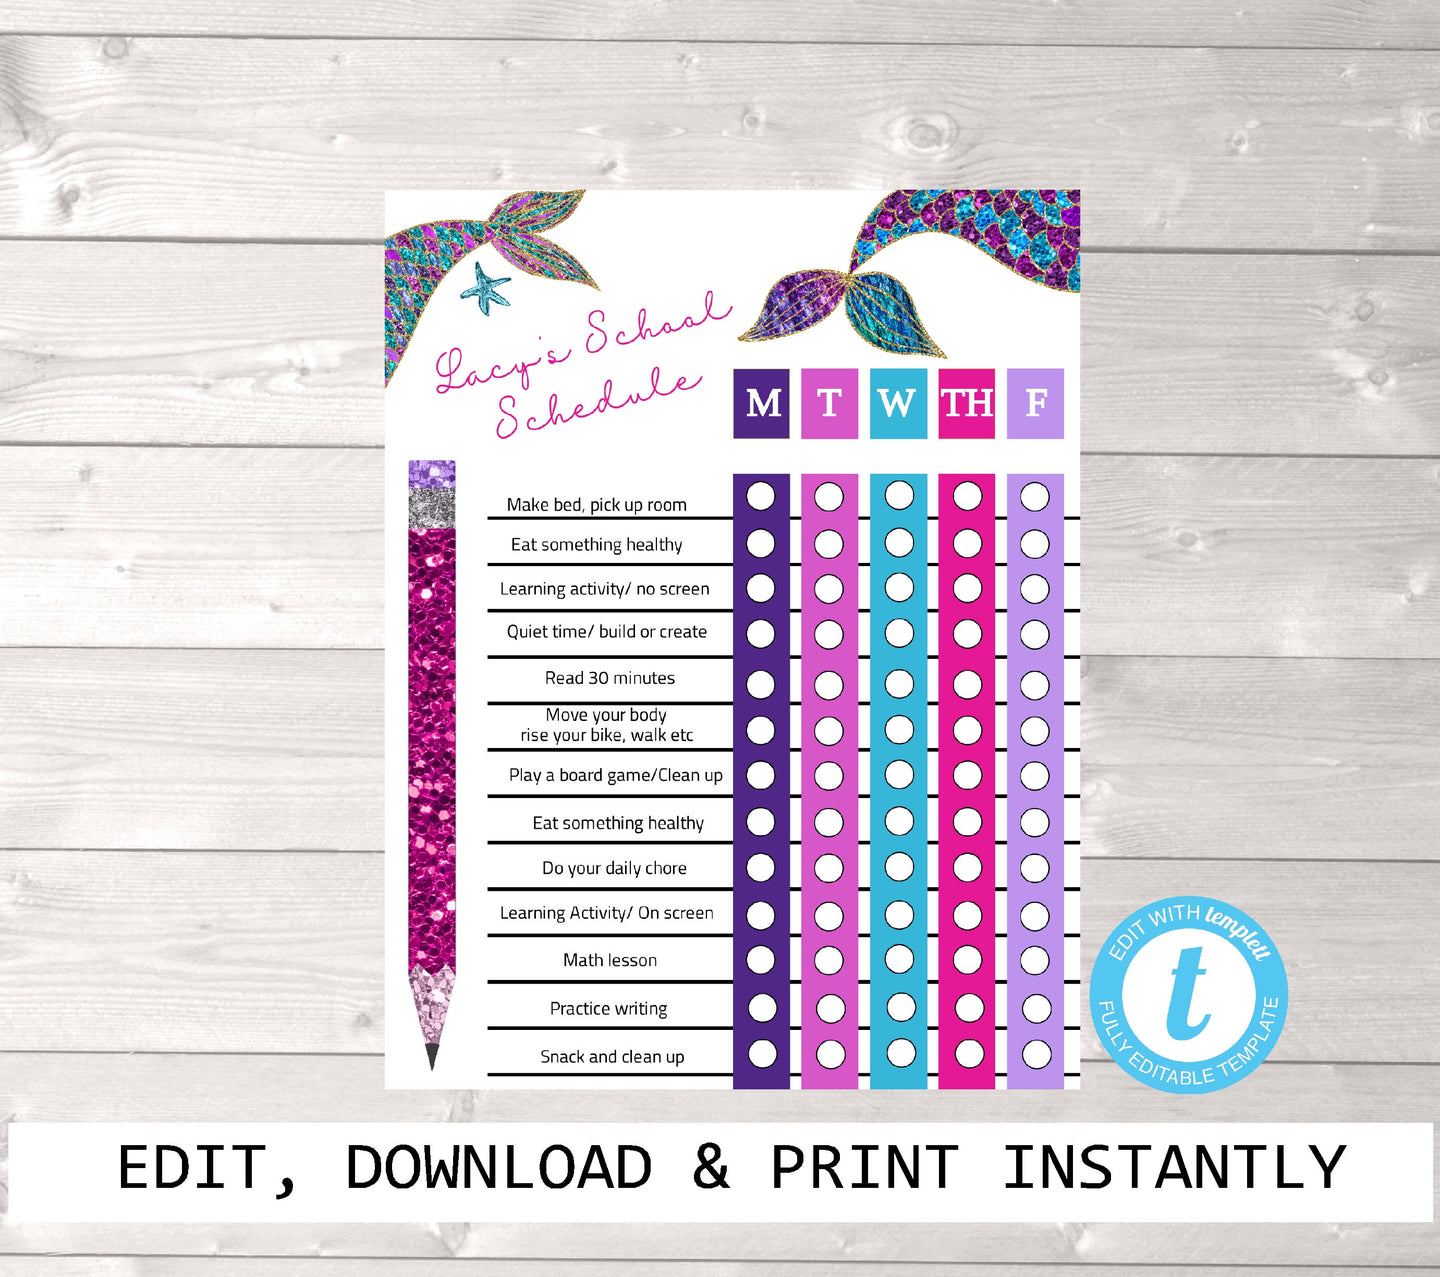 Mermaid Homechool schedule, Back to school, Distance Learning Chart, Family Schedule, Daily Planner, Kids Routine Checklist, Timeline, Chore